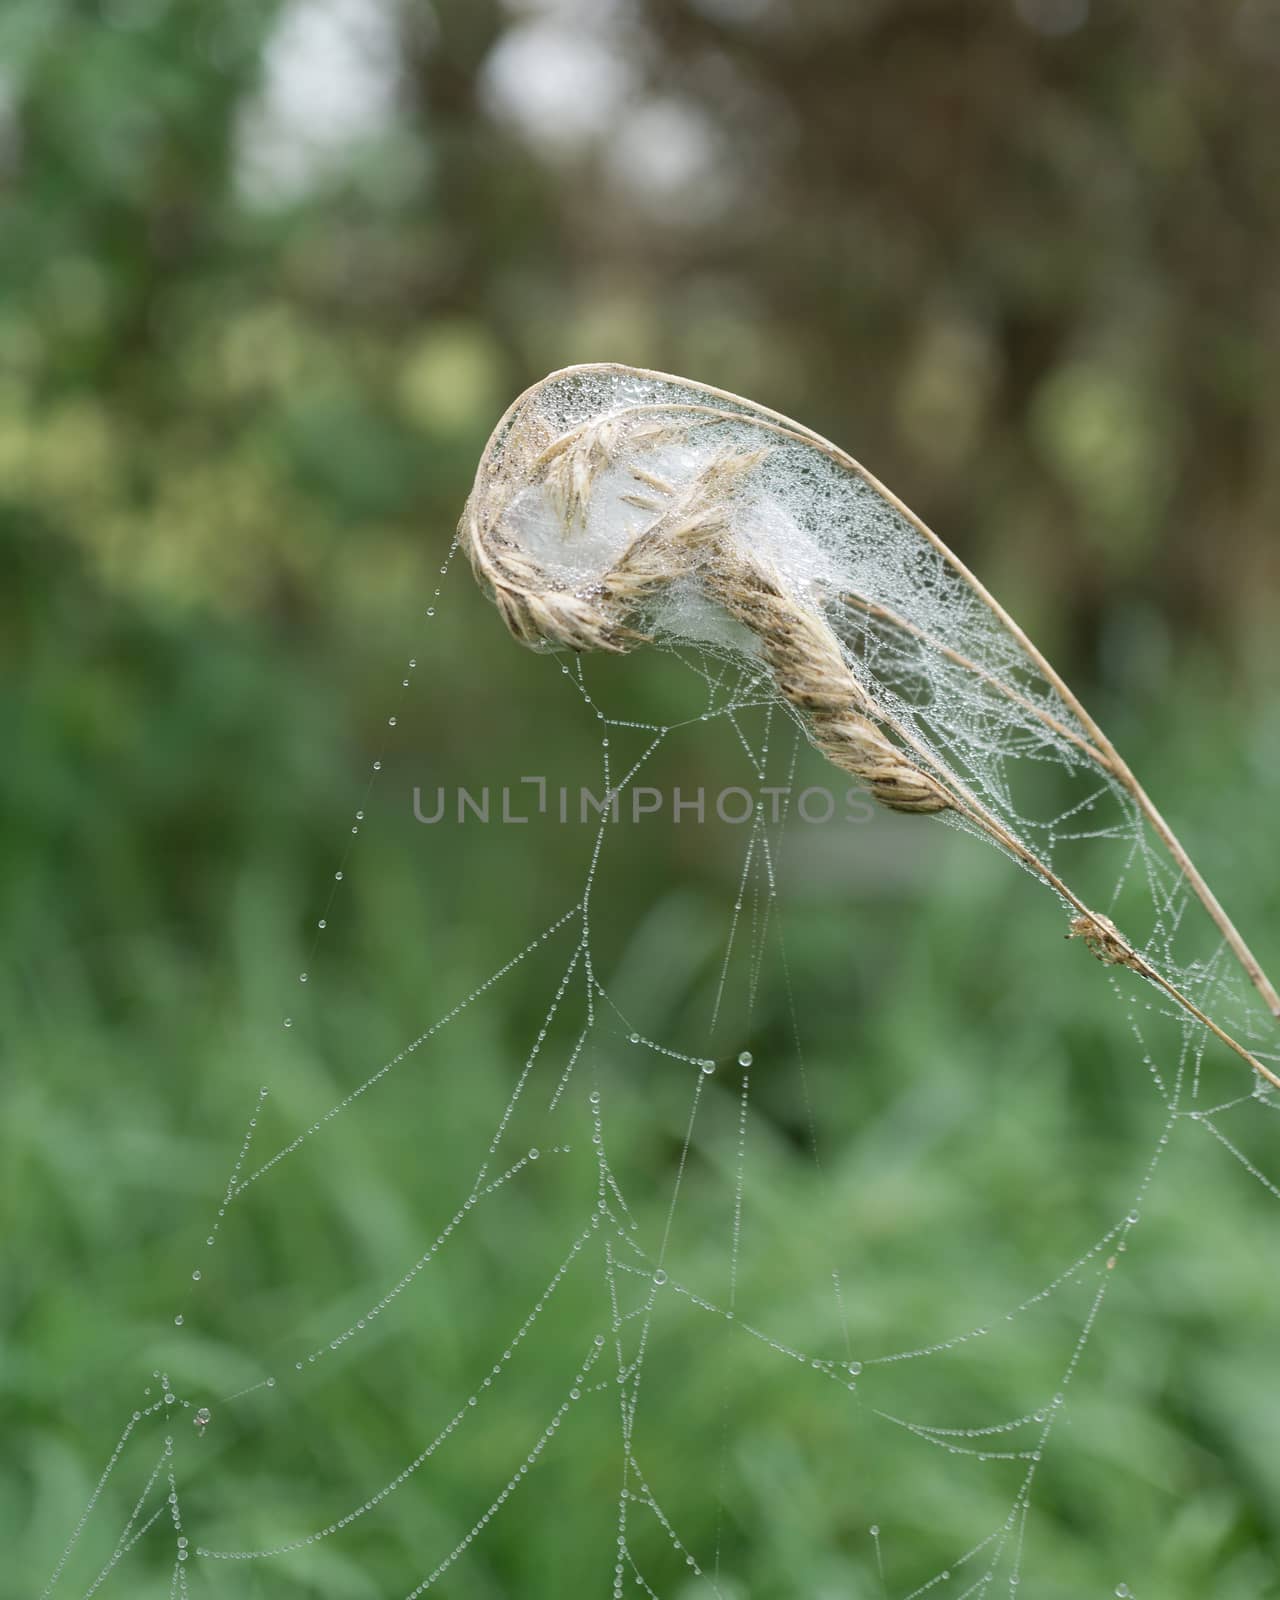 Messy wet spider web on a  blade of grass